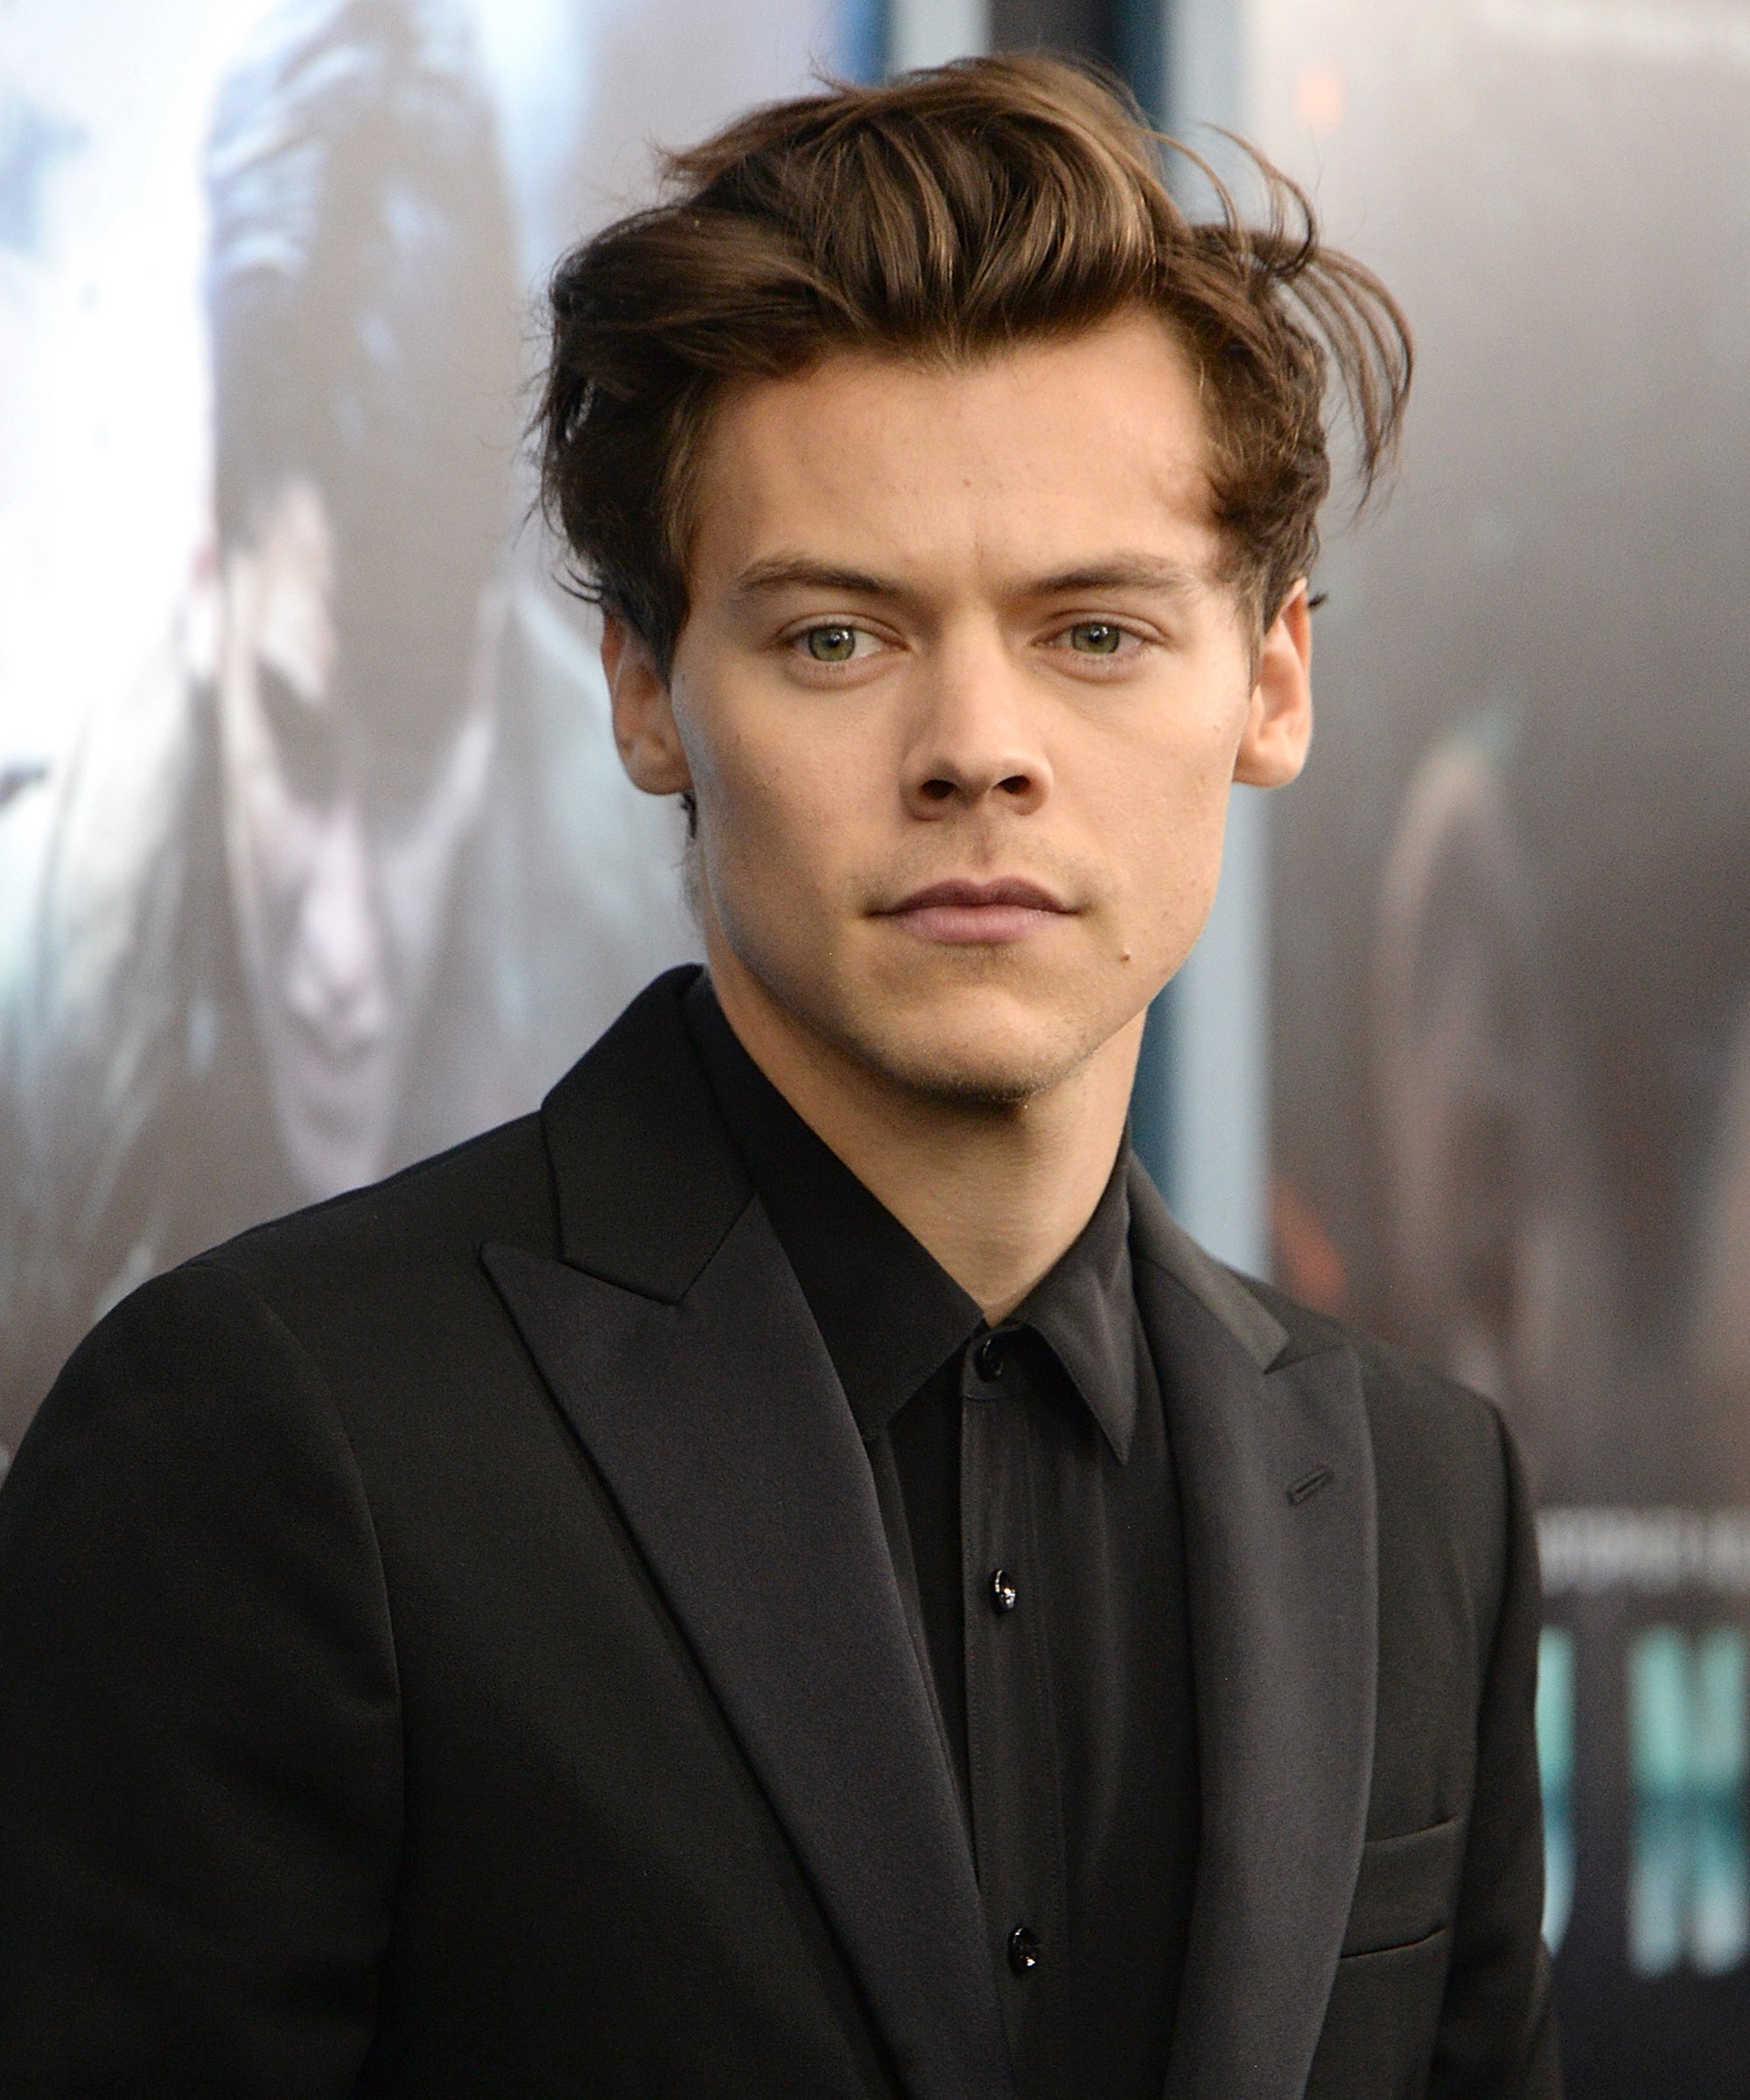 How to Style Your Hair Like Harry Styles - wikiHow